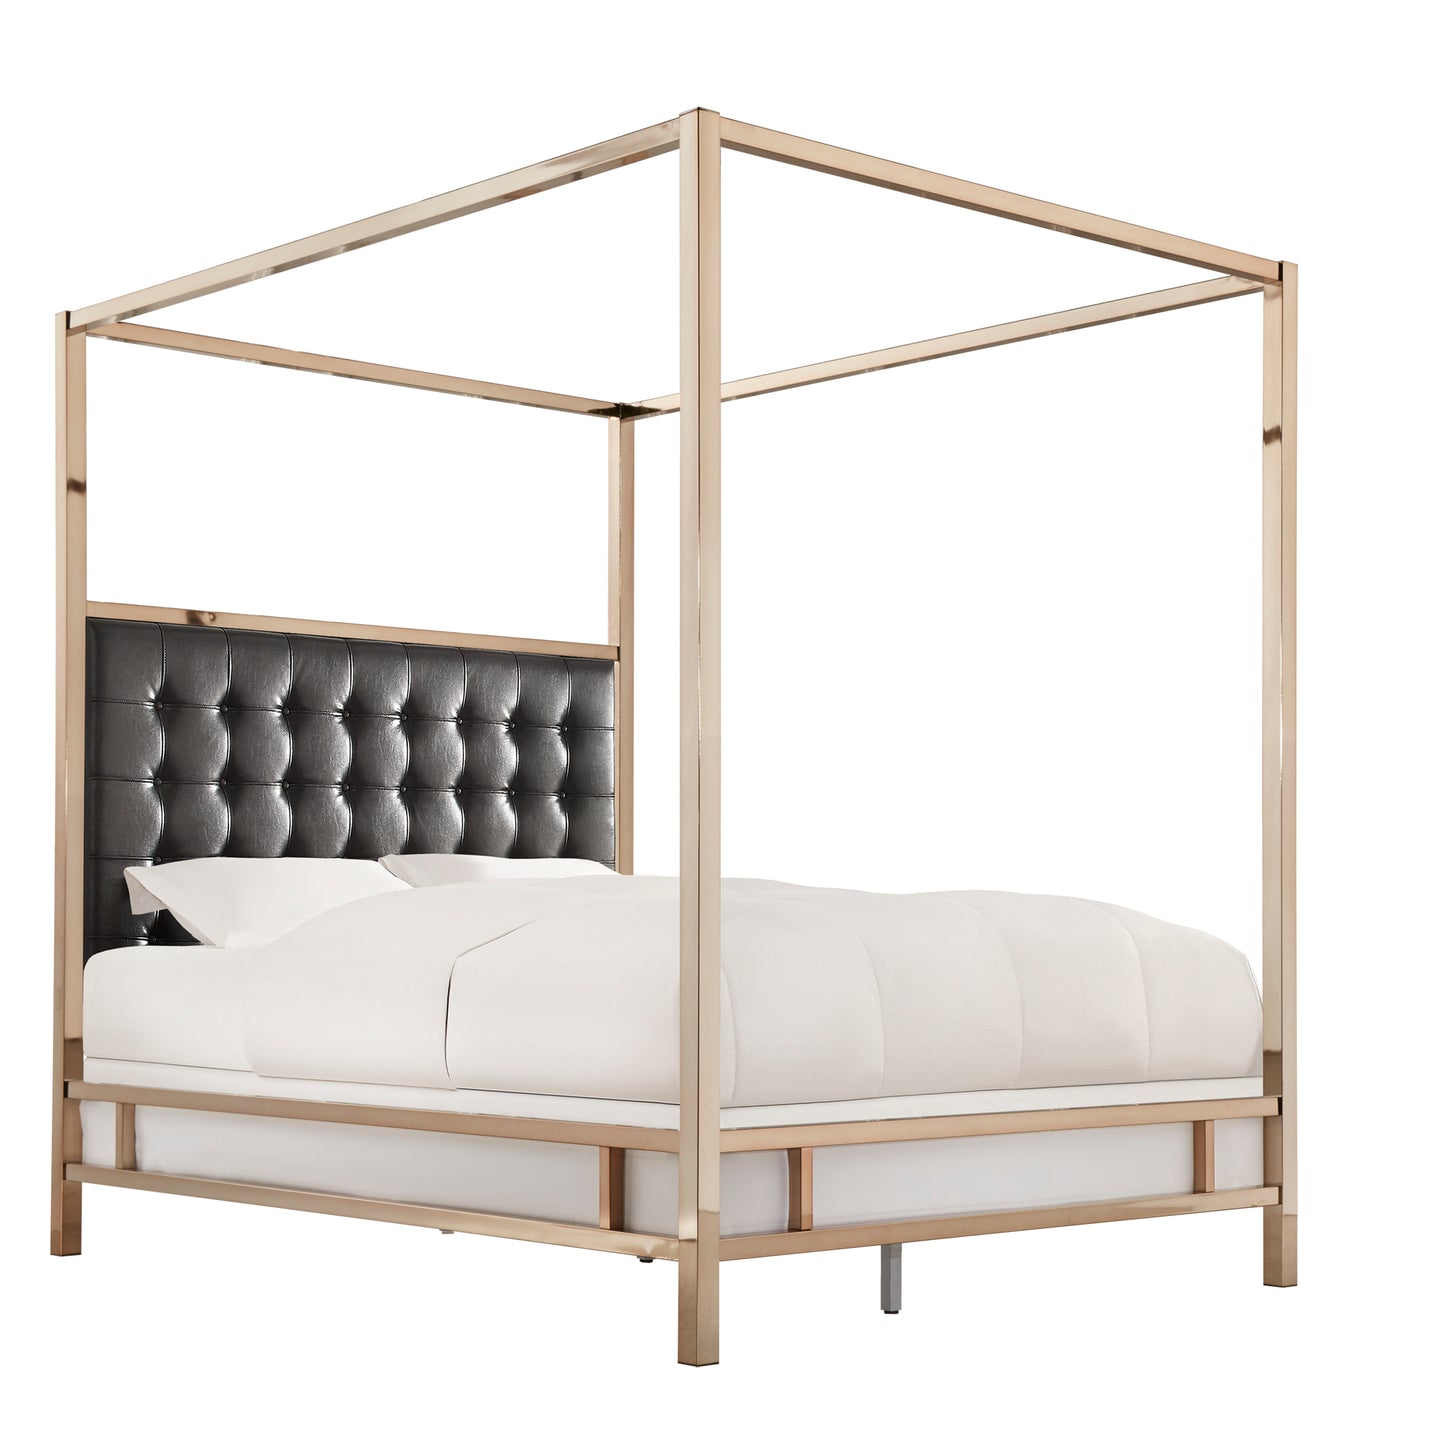 Metal Canopy Bed with Upholstered Headboard - Black Bonded Leather, Champagne Gold Finish, Queen Size